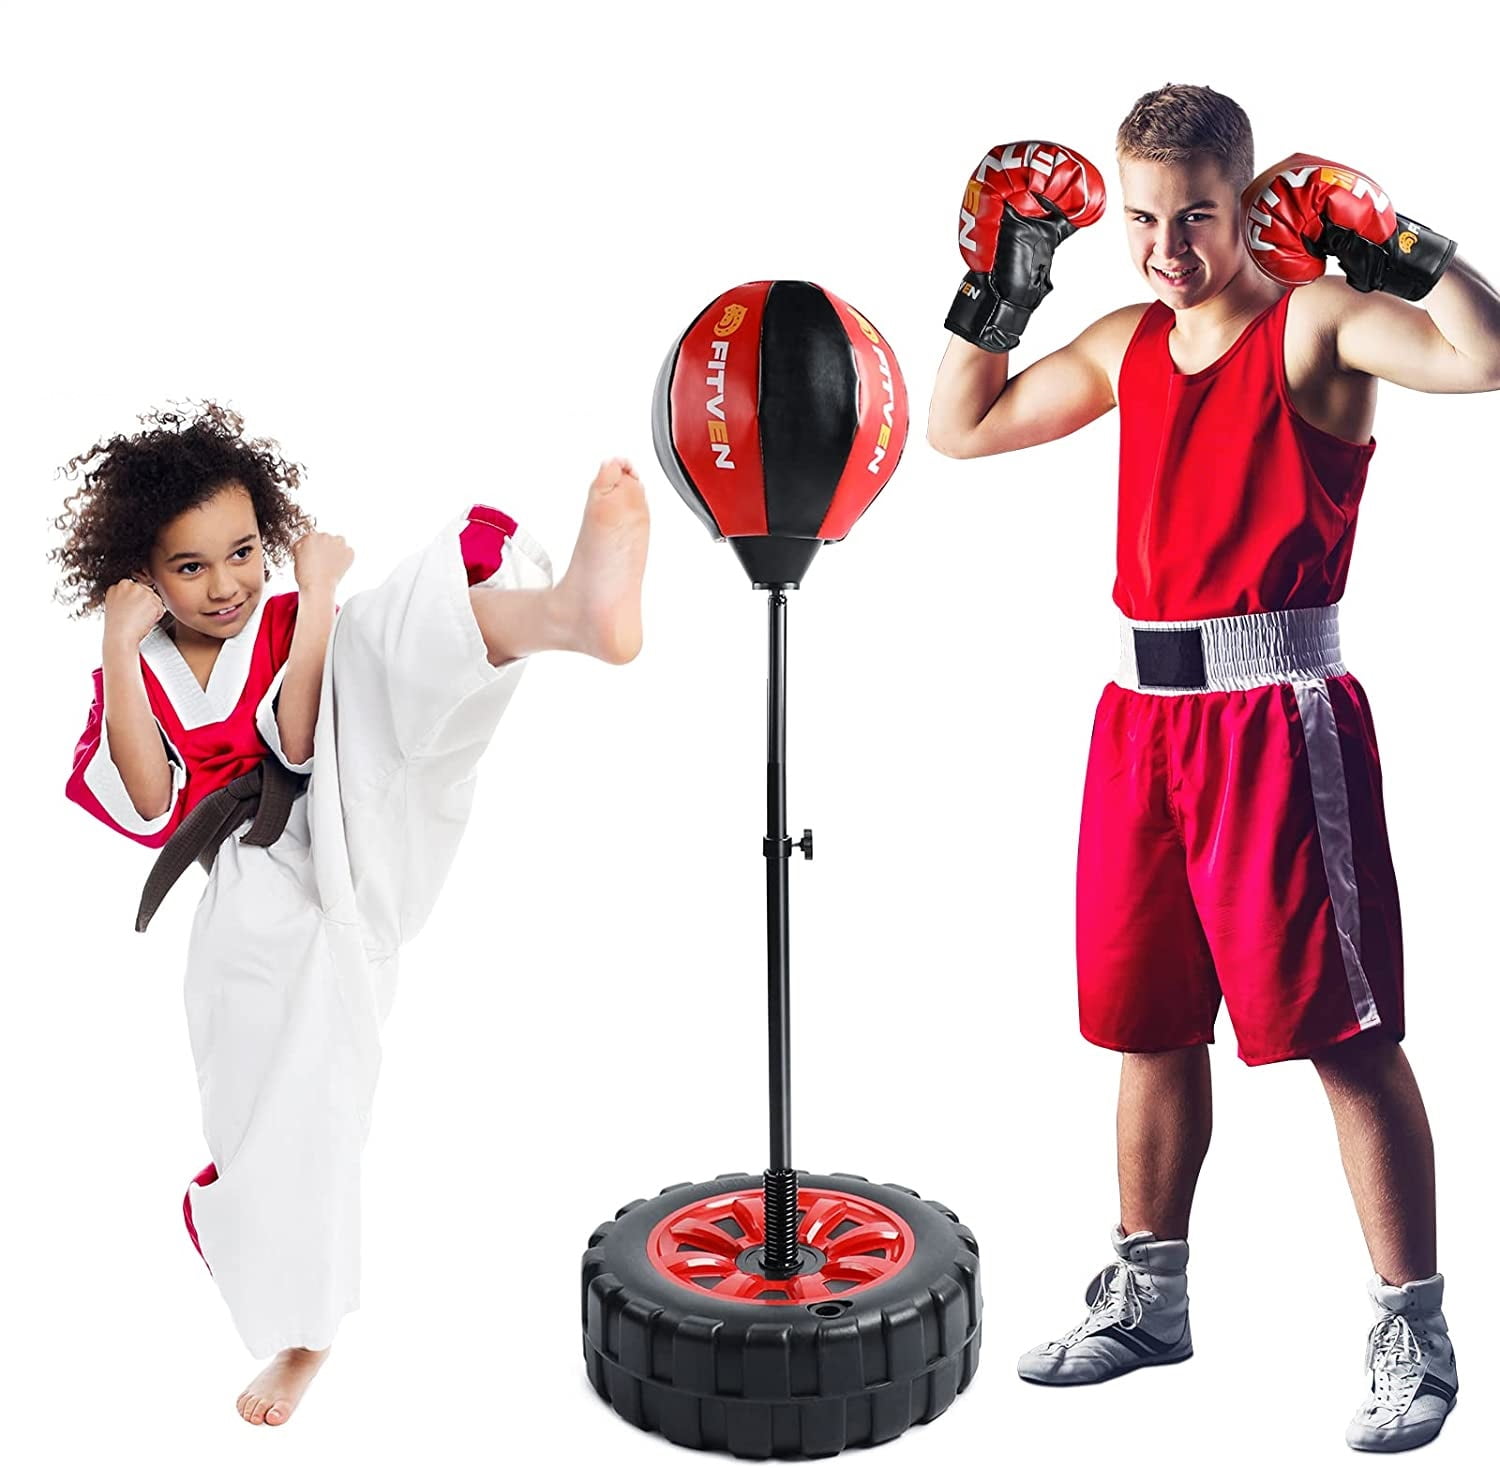 Kango Fitness PU Boxing Punch Bag Gloves Red Black and White 10-14oz 